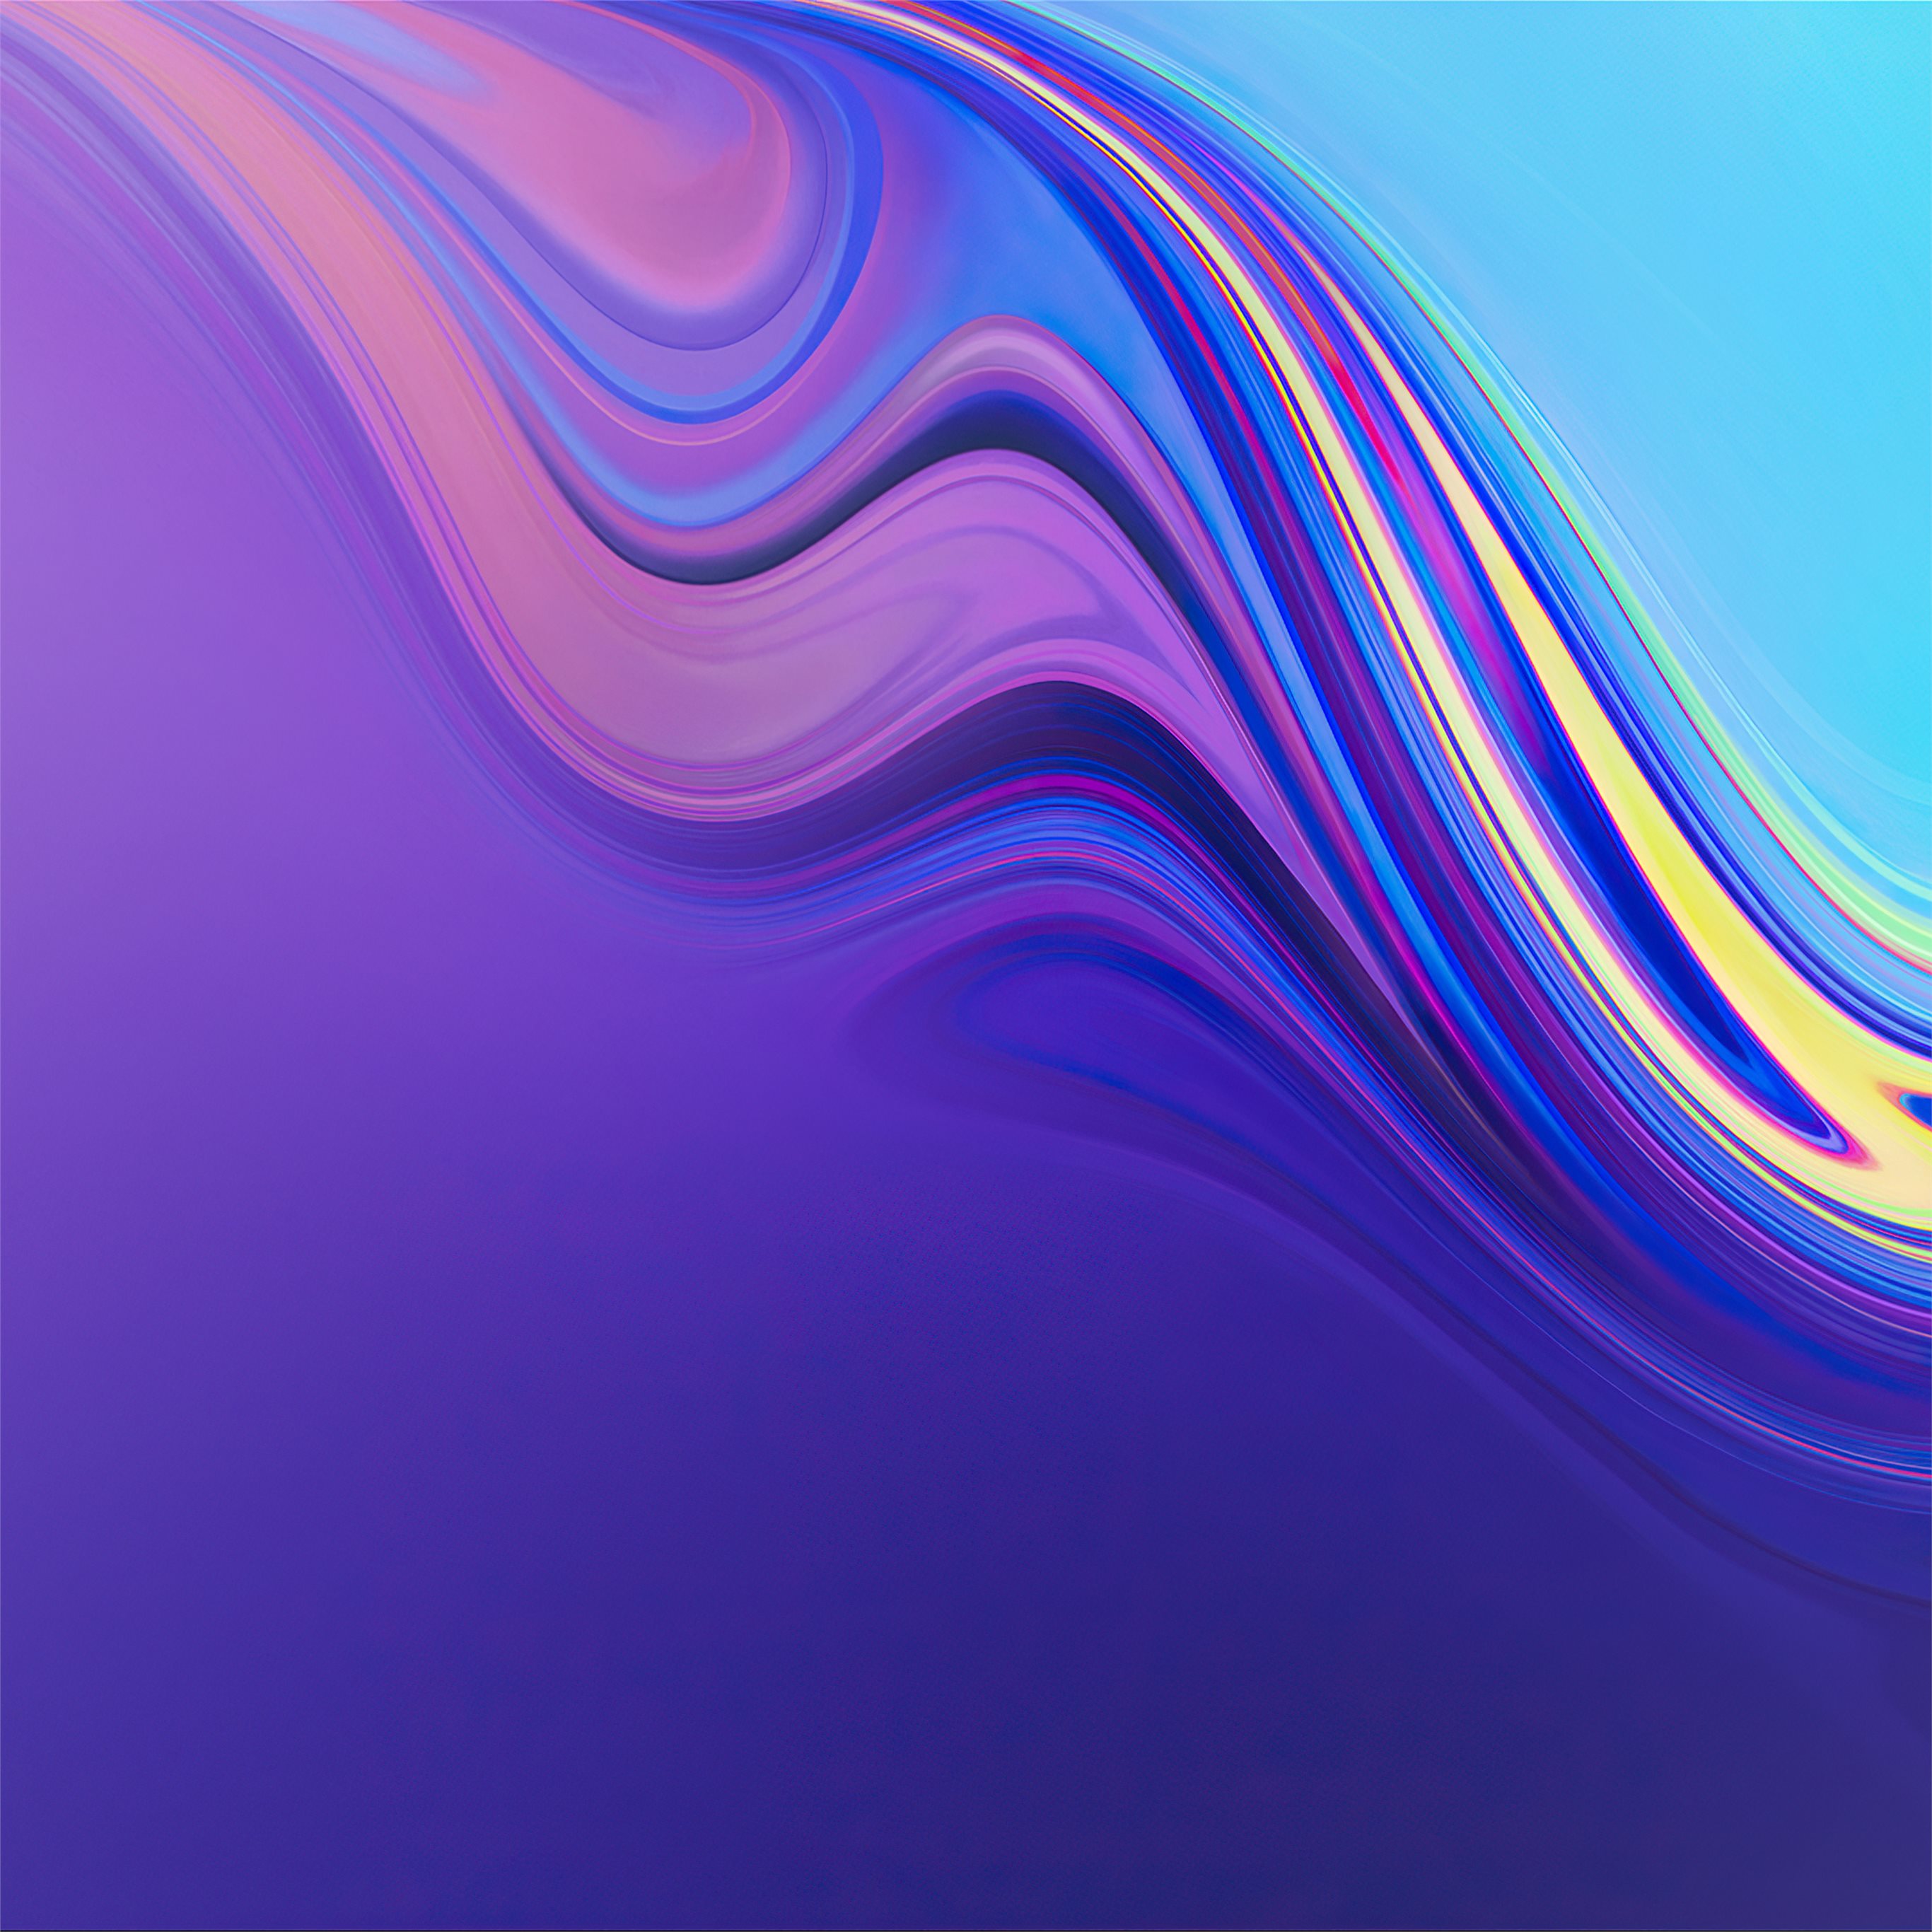 Android Wallpapers Archives | TechBeasts